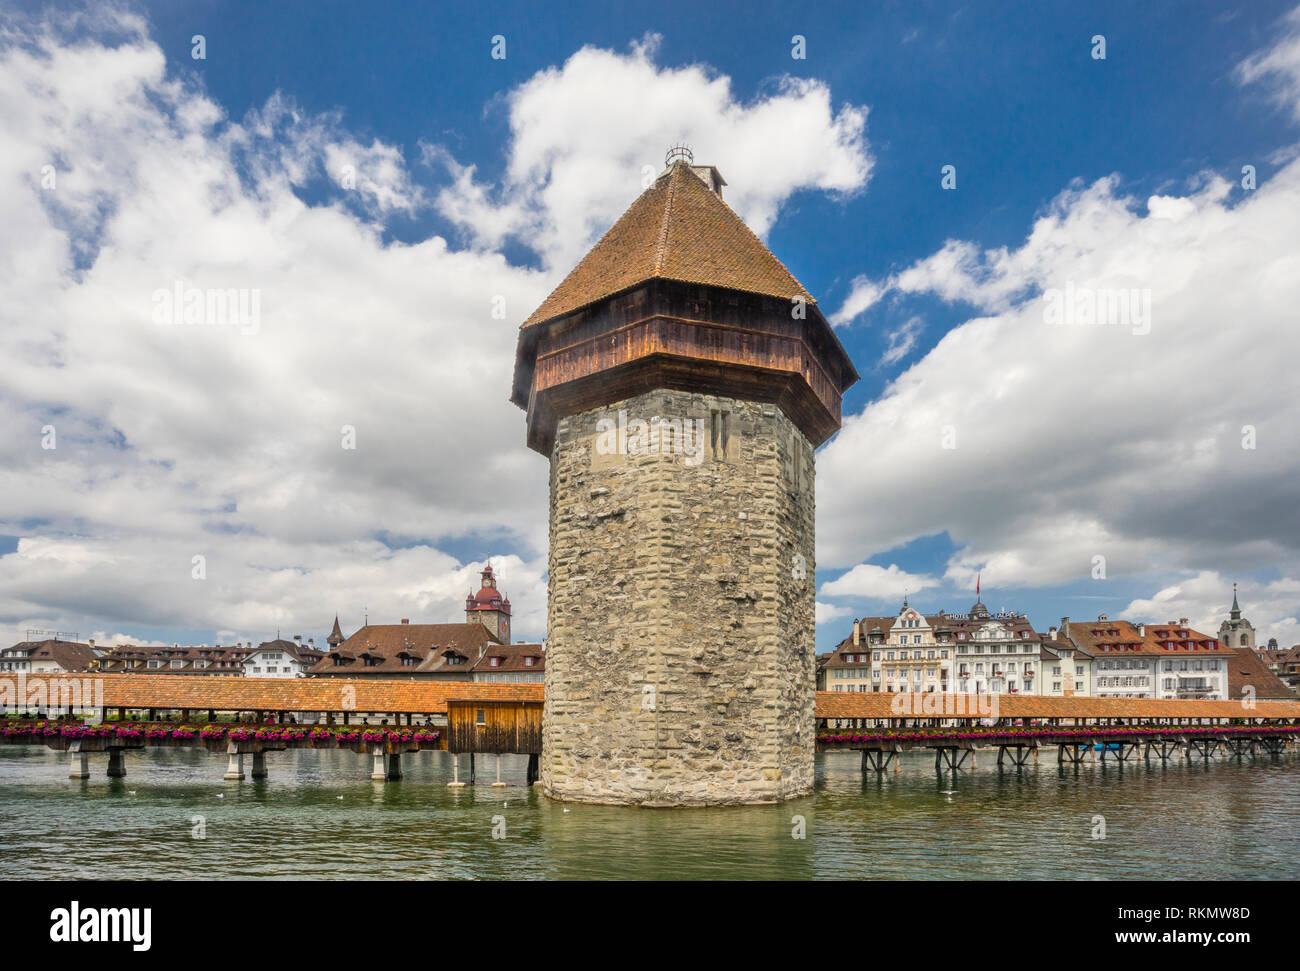 the wooden medieval Kapellbrücke (Chapel Bridge) with its iconic octagonal stone tower, Wasserturm, meaning tower in the water, Lucerne, Canton Lucern Stock Photo